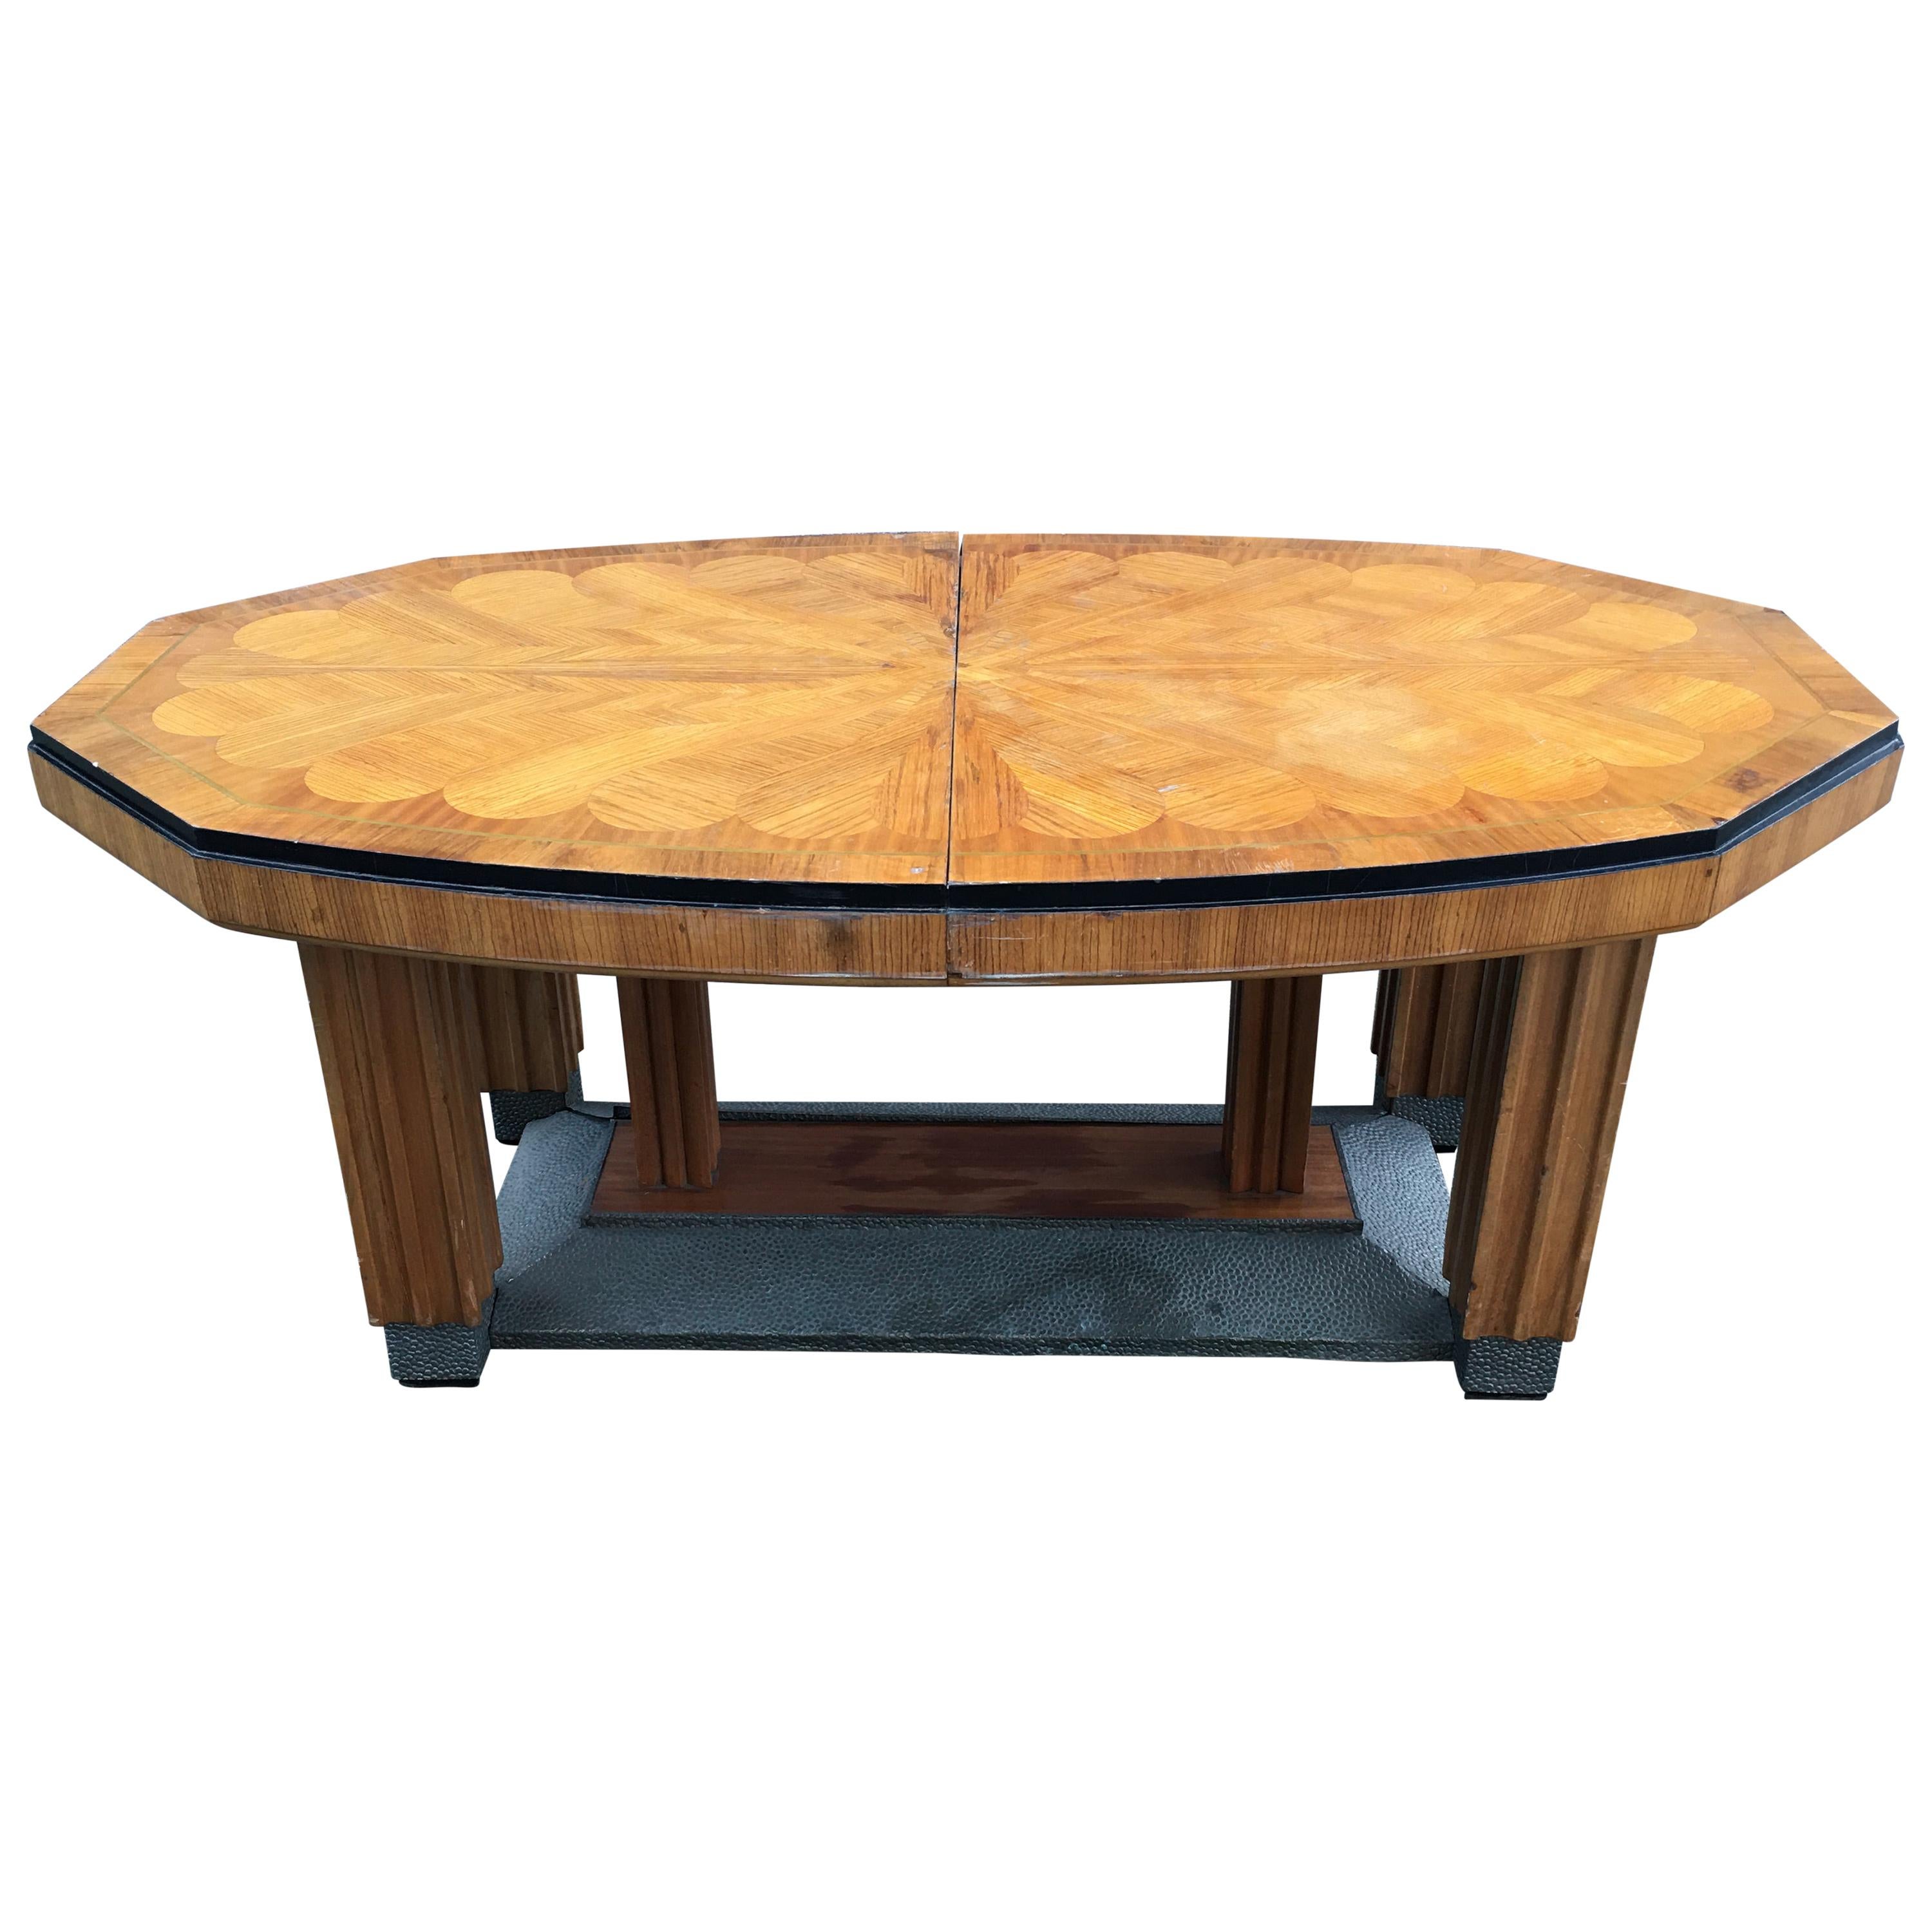 Large Art Deco Dining Table with Marquetry Design on the Top, circa 1925-1930 For Sale